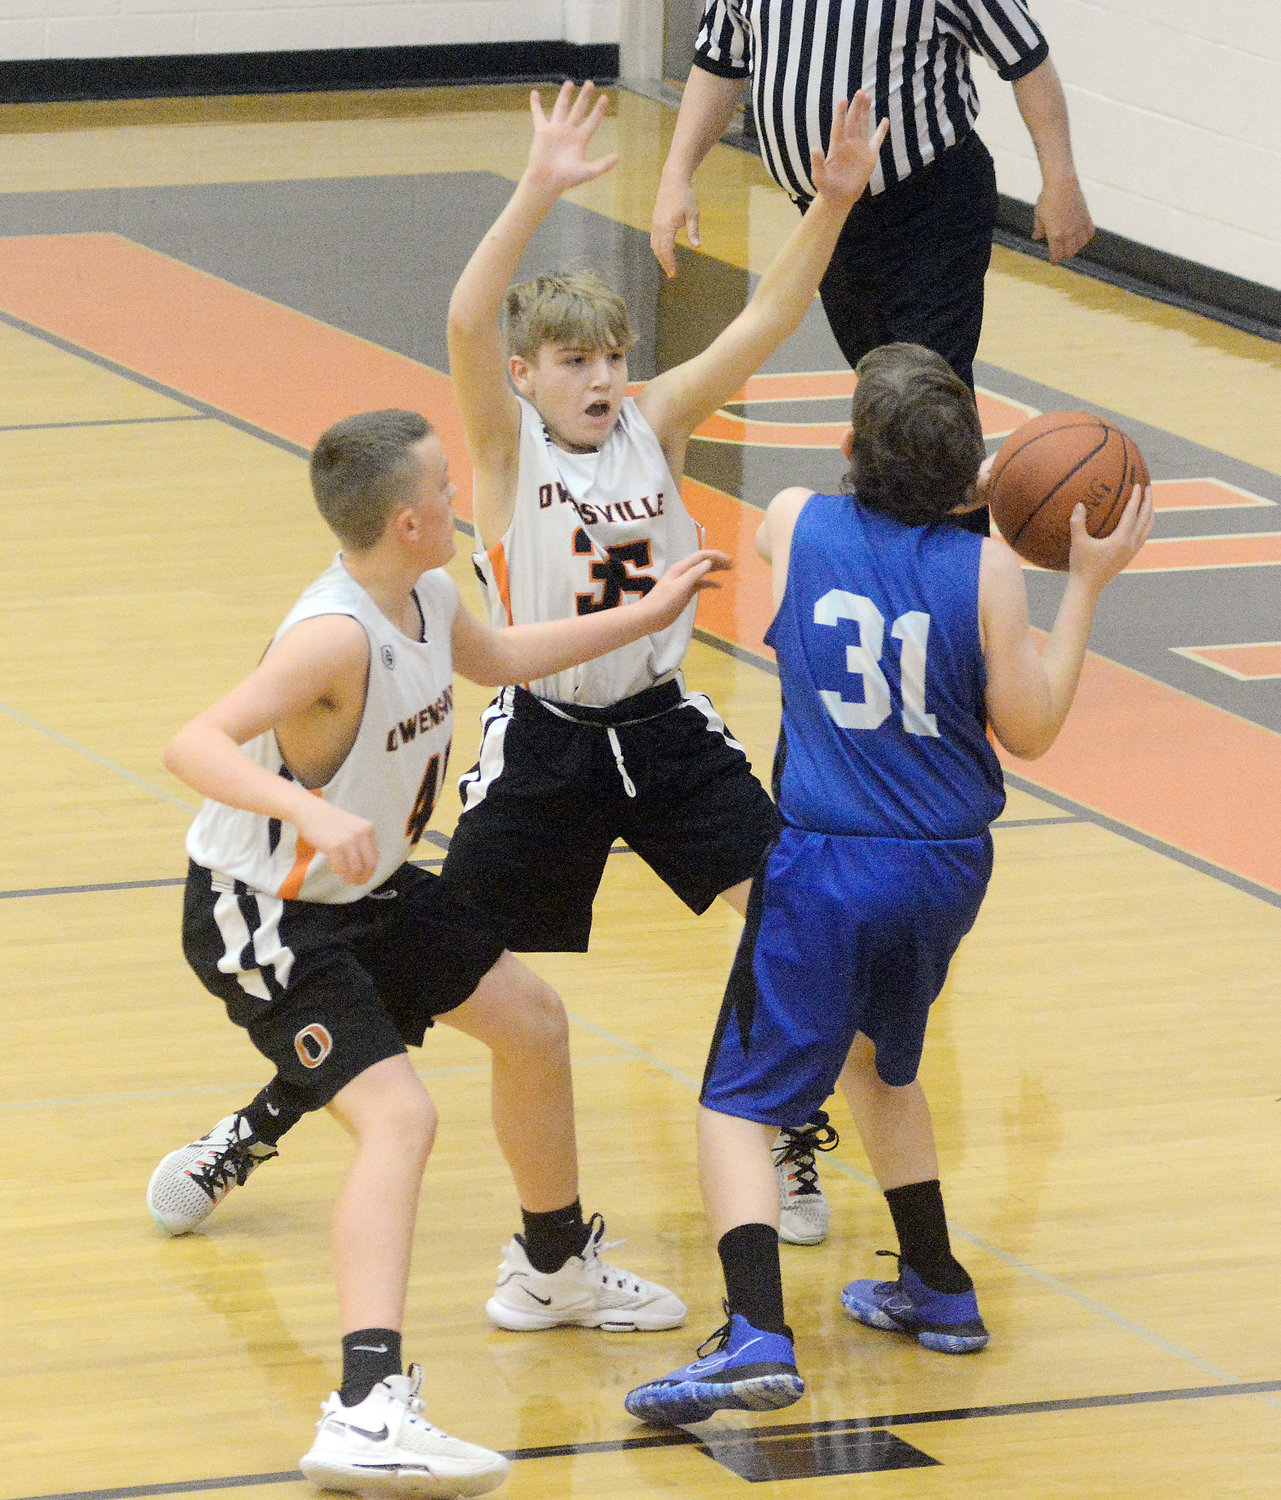 OMS Dutchmen duo Brody Slinkard and Wyatt Lewis (from left) close in on Hermann’s Chase Branson during seventh-grade action in which Owensville kept their season record unblemished at 8-0 following a 35-24 win over the visiting Bearcats.